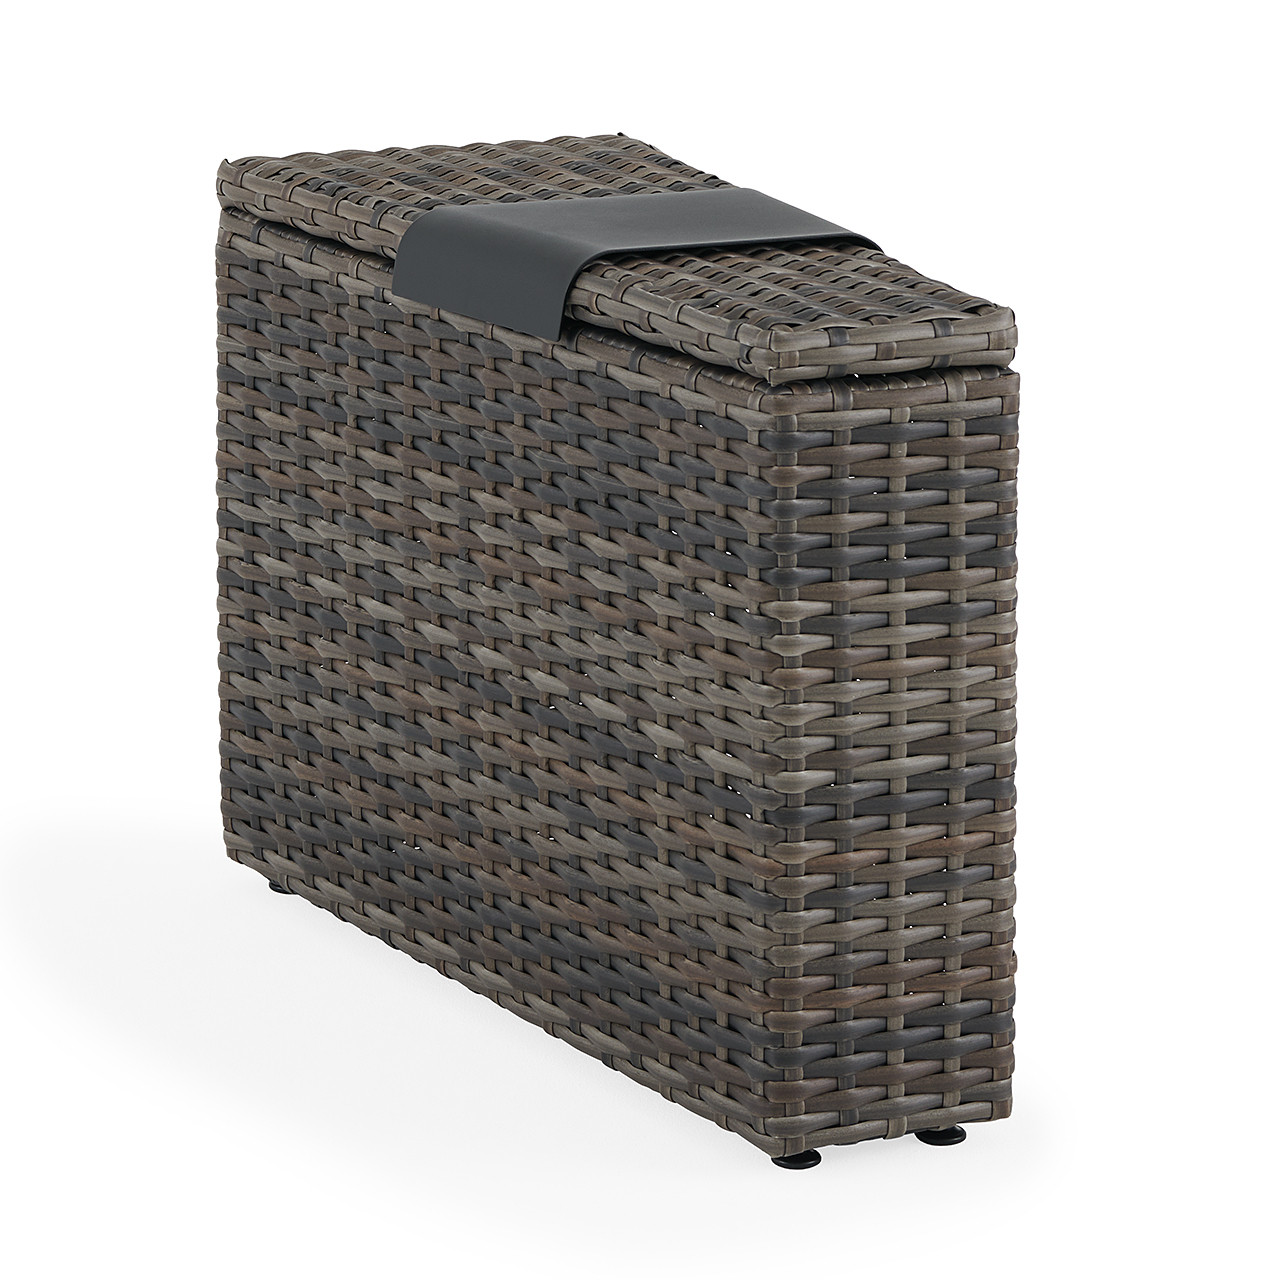 San Lucas Outdoor Wicker Storage Wedge End Table With Aluminum Drink Tray